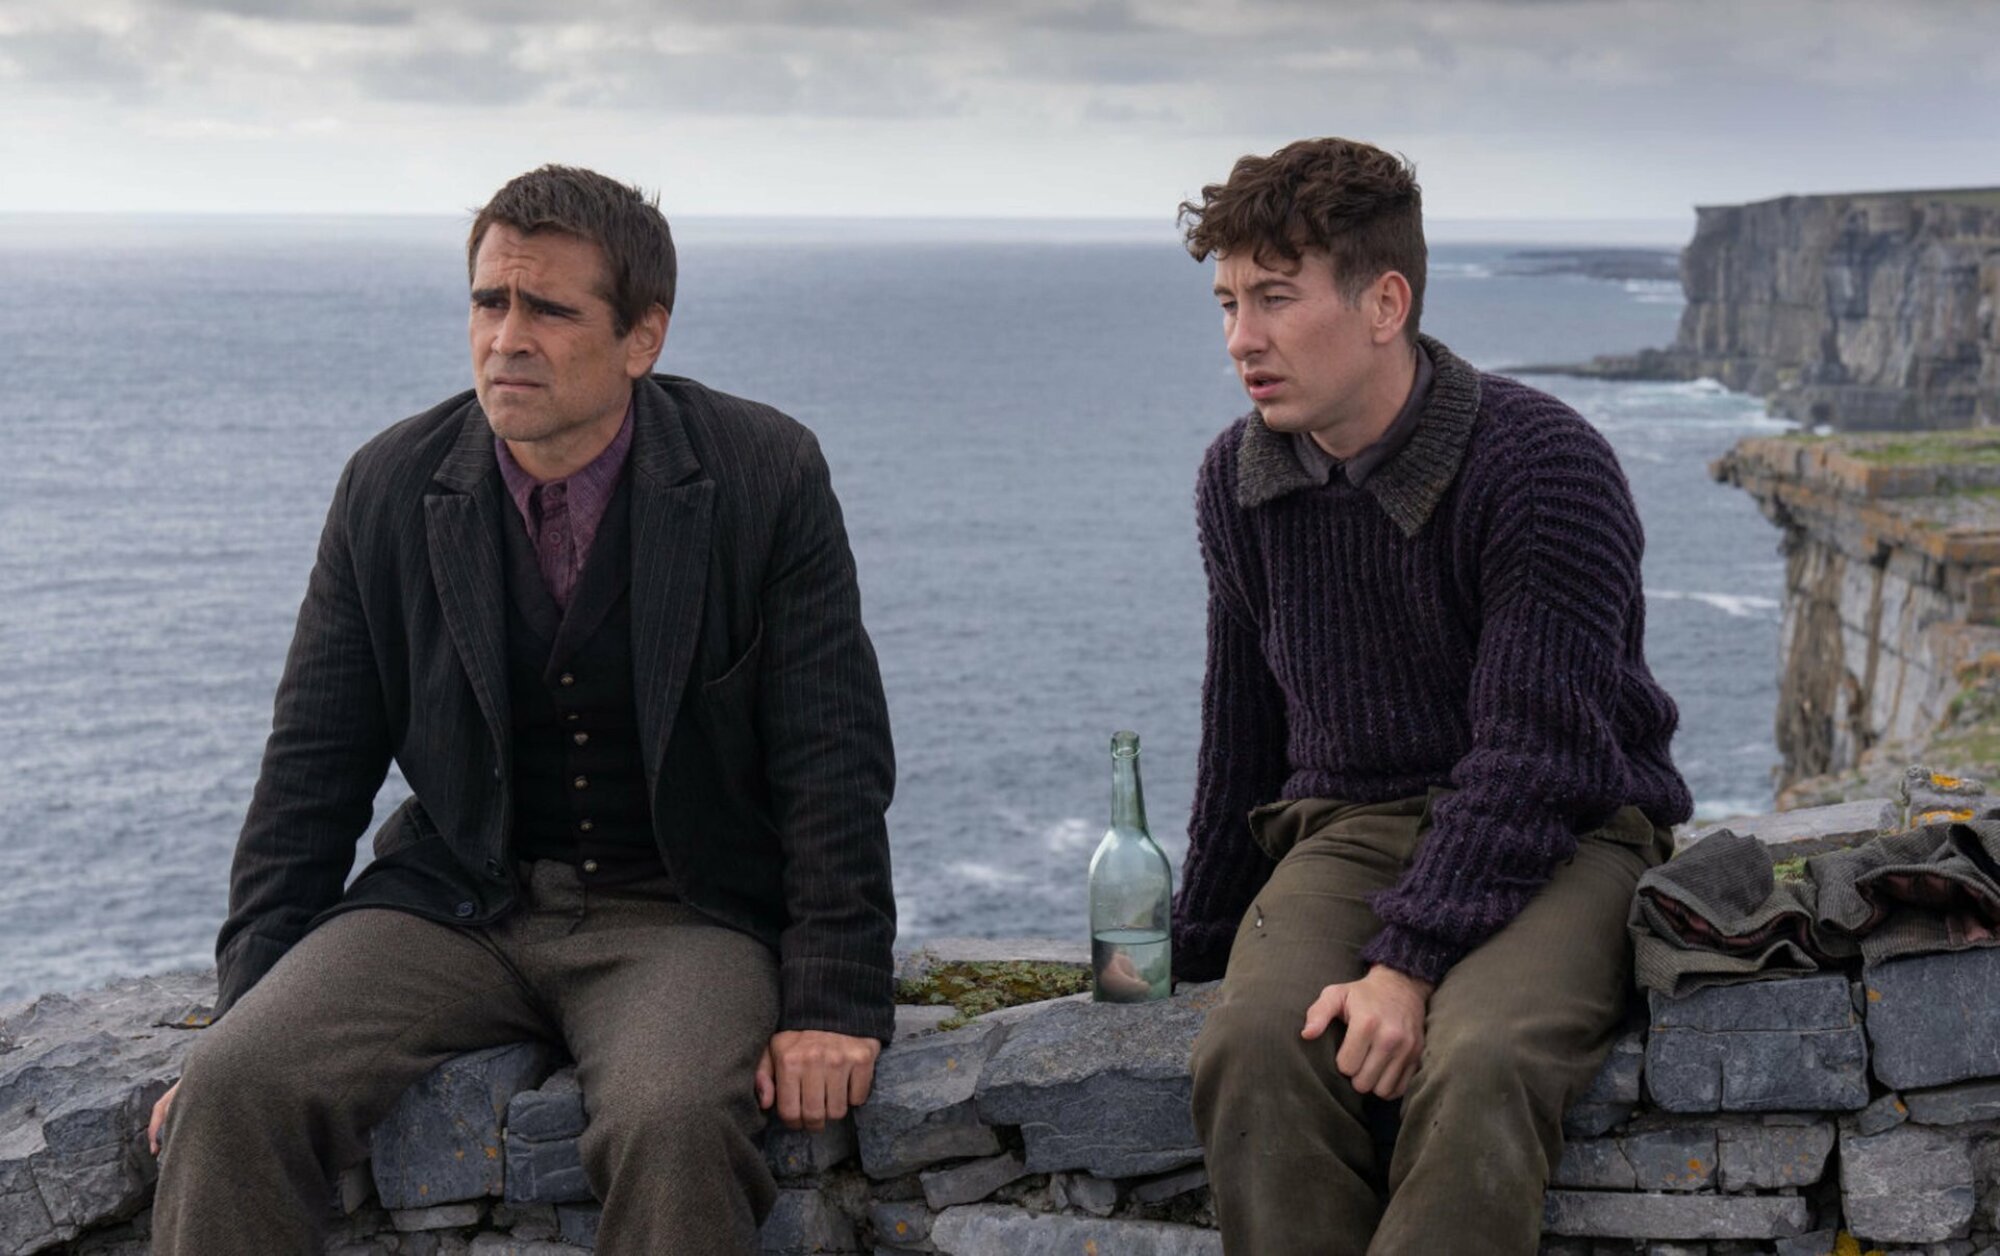 Colin Farrell and Barry Keoghan sit on a stone wall with their backs facing the water in "The Banshees of Inisherin."